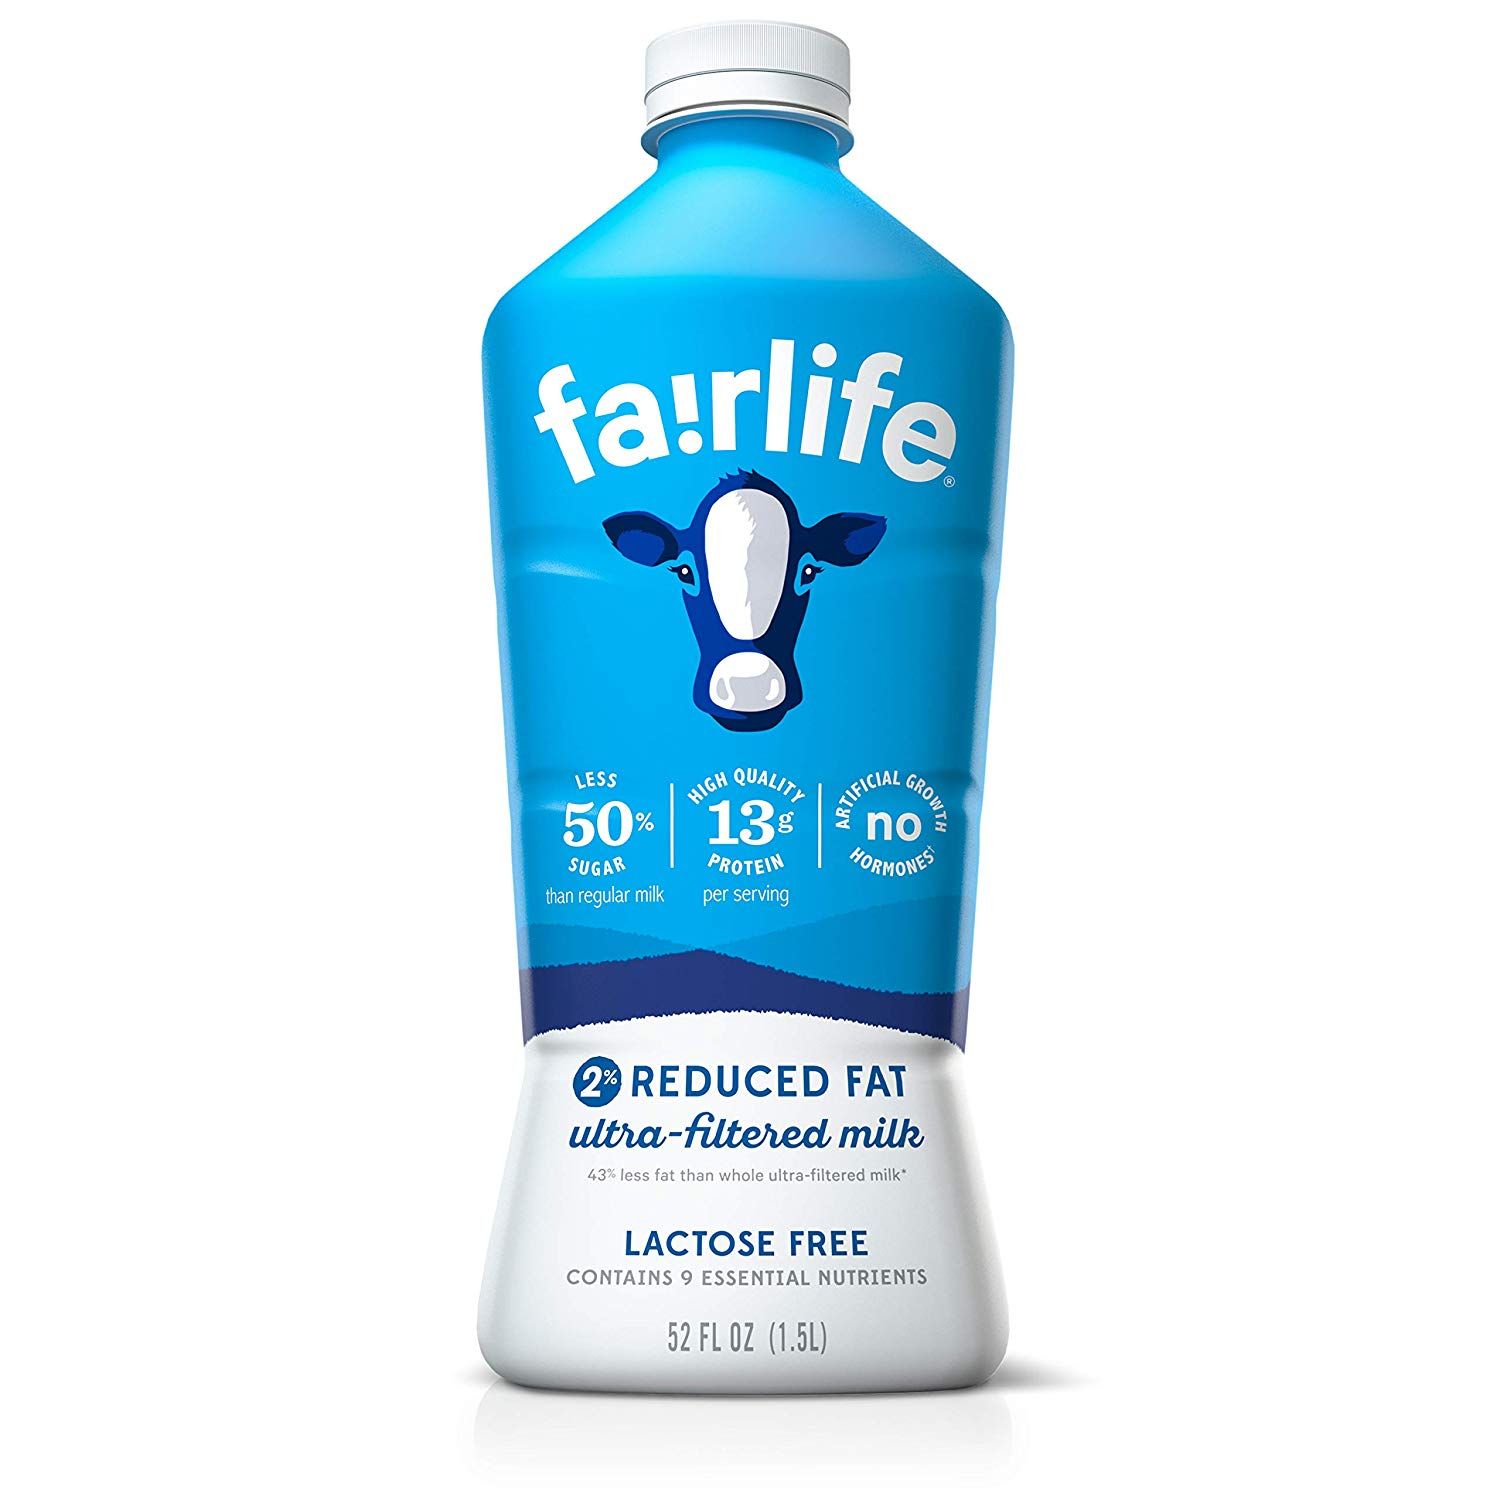 Fairlife Milk Class Action Says Cows Are Treated Cruelly